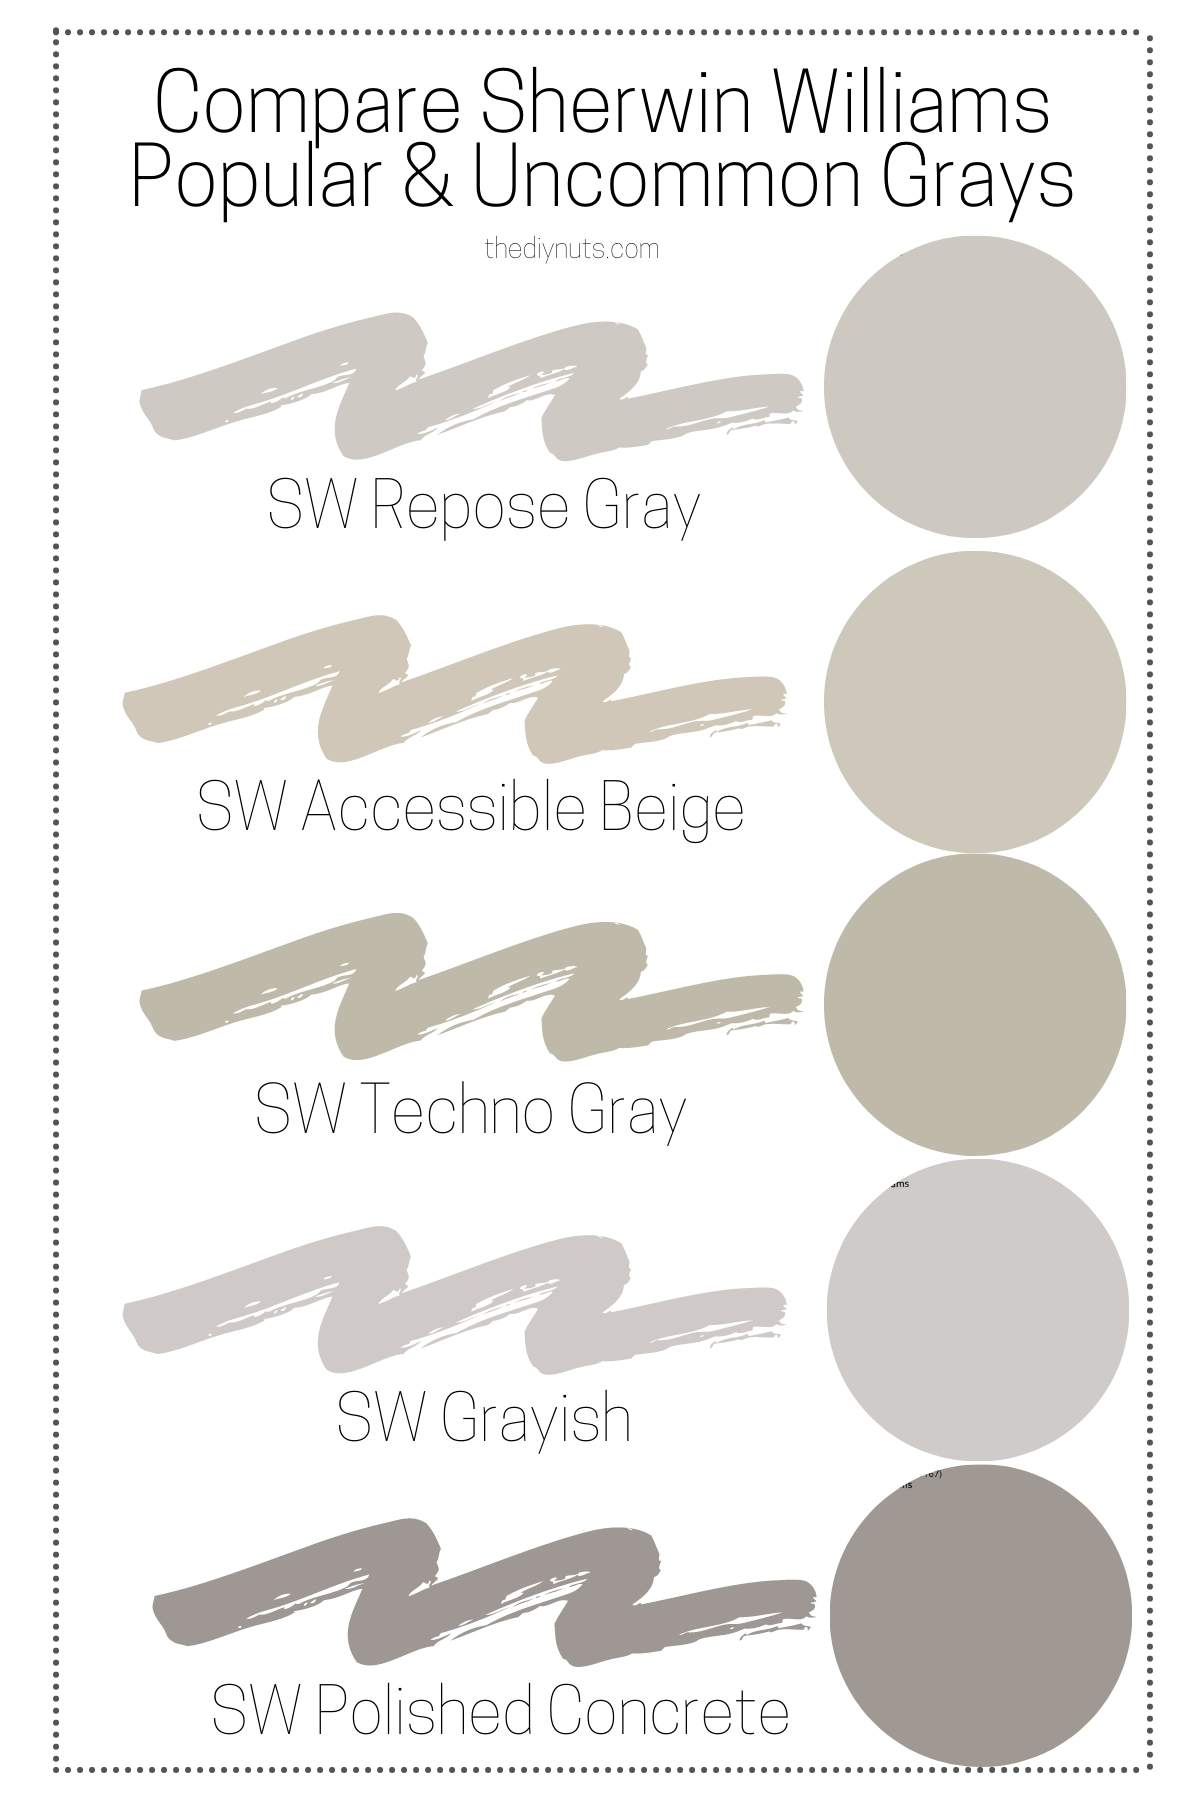 Compare Sherwin Williams gray paint repose gray, polished concrete, agreeable beige, grayish.